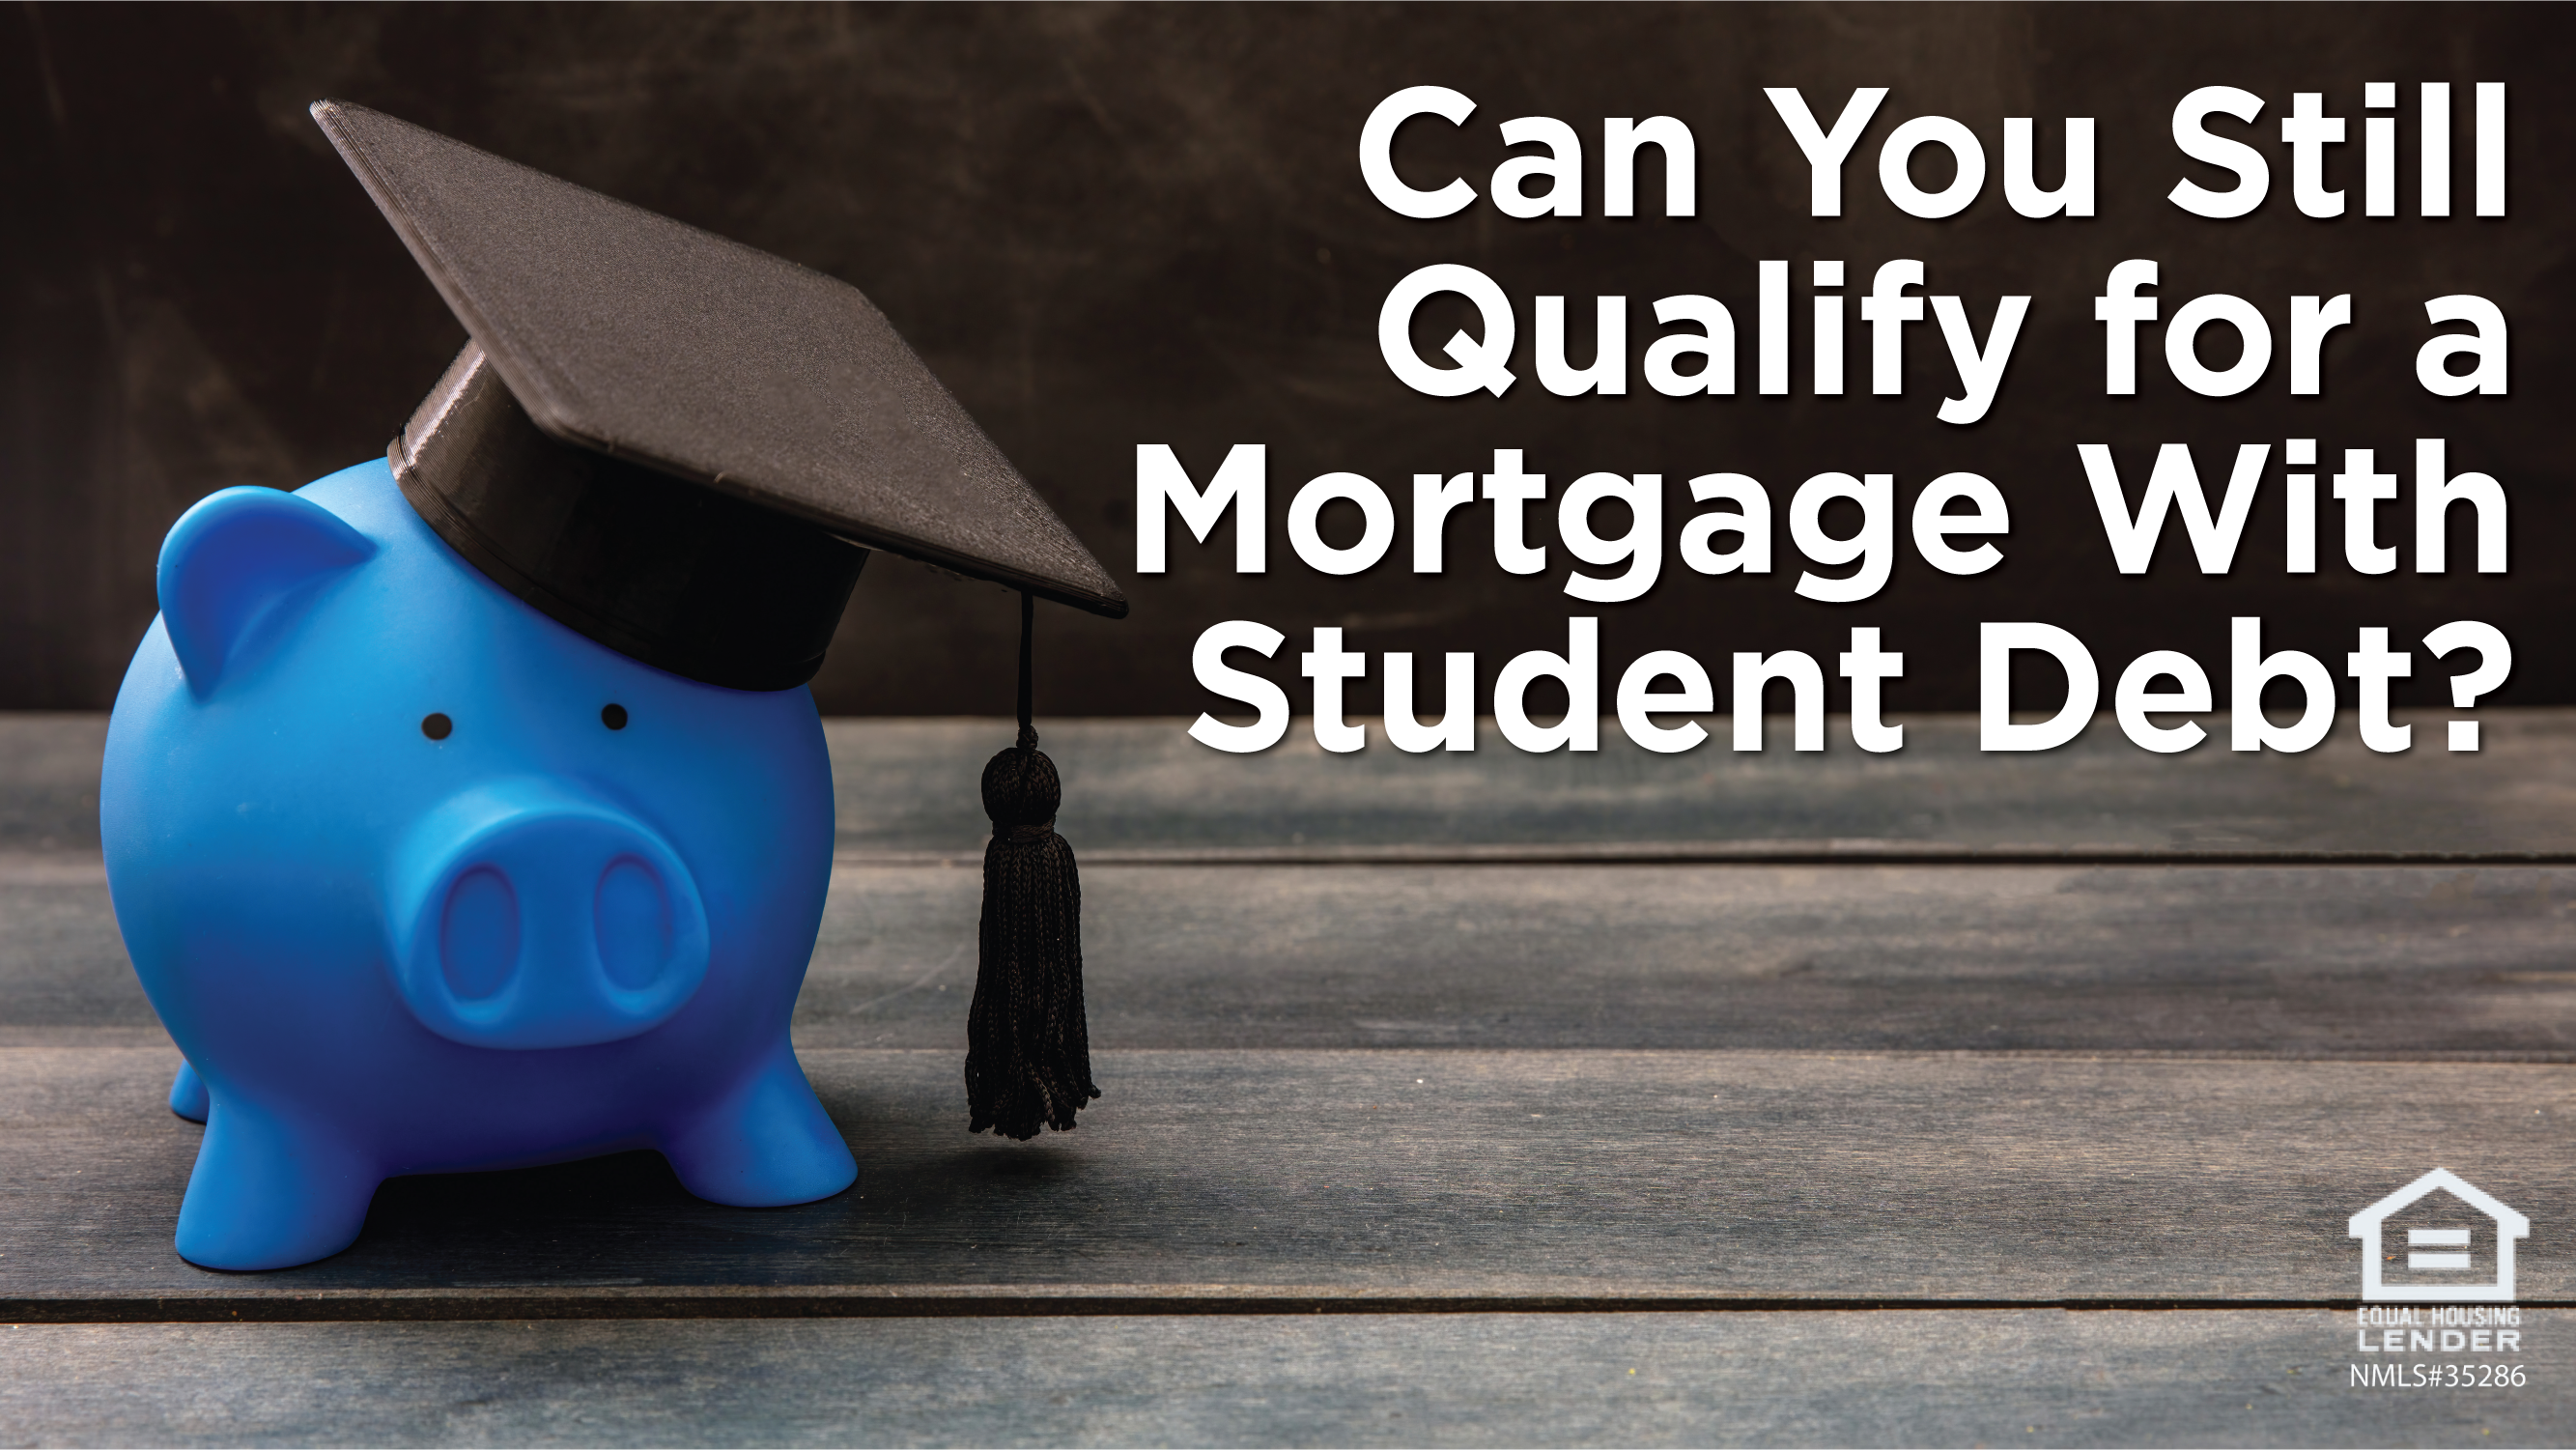 Student Loan Payments Resuming Soon, Can You Still Qualify for a Mortgage With Student Debt?